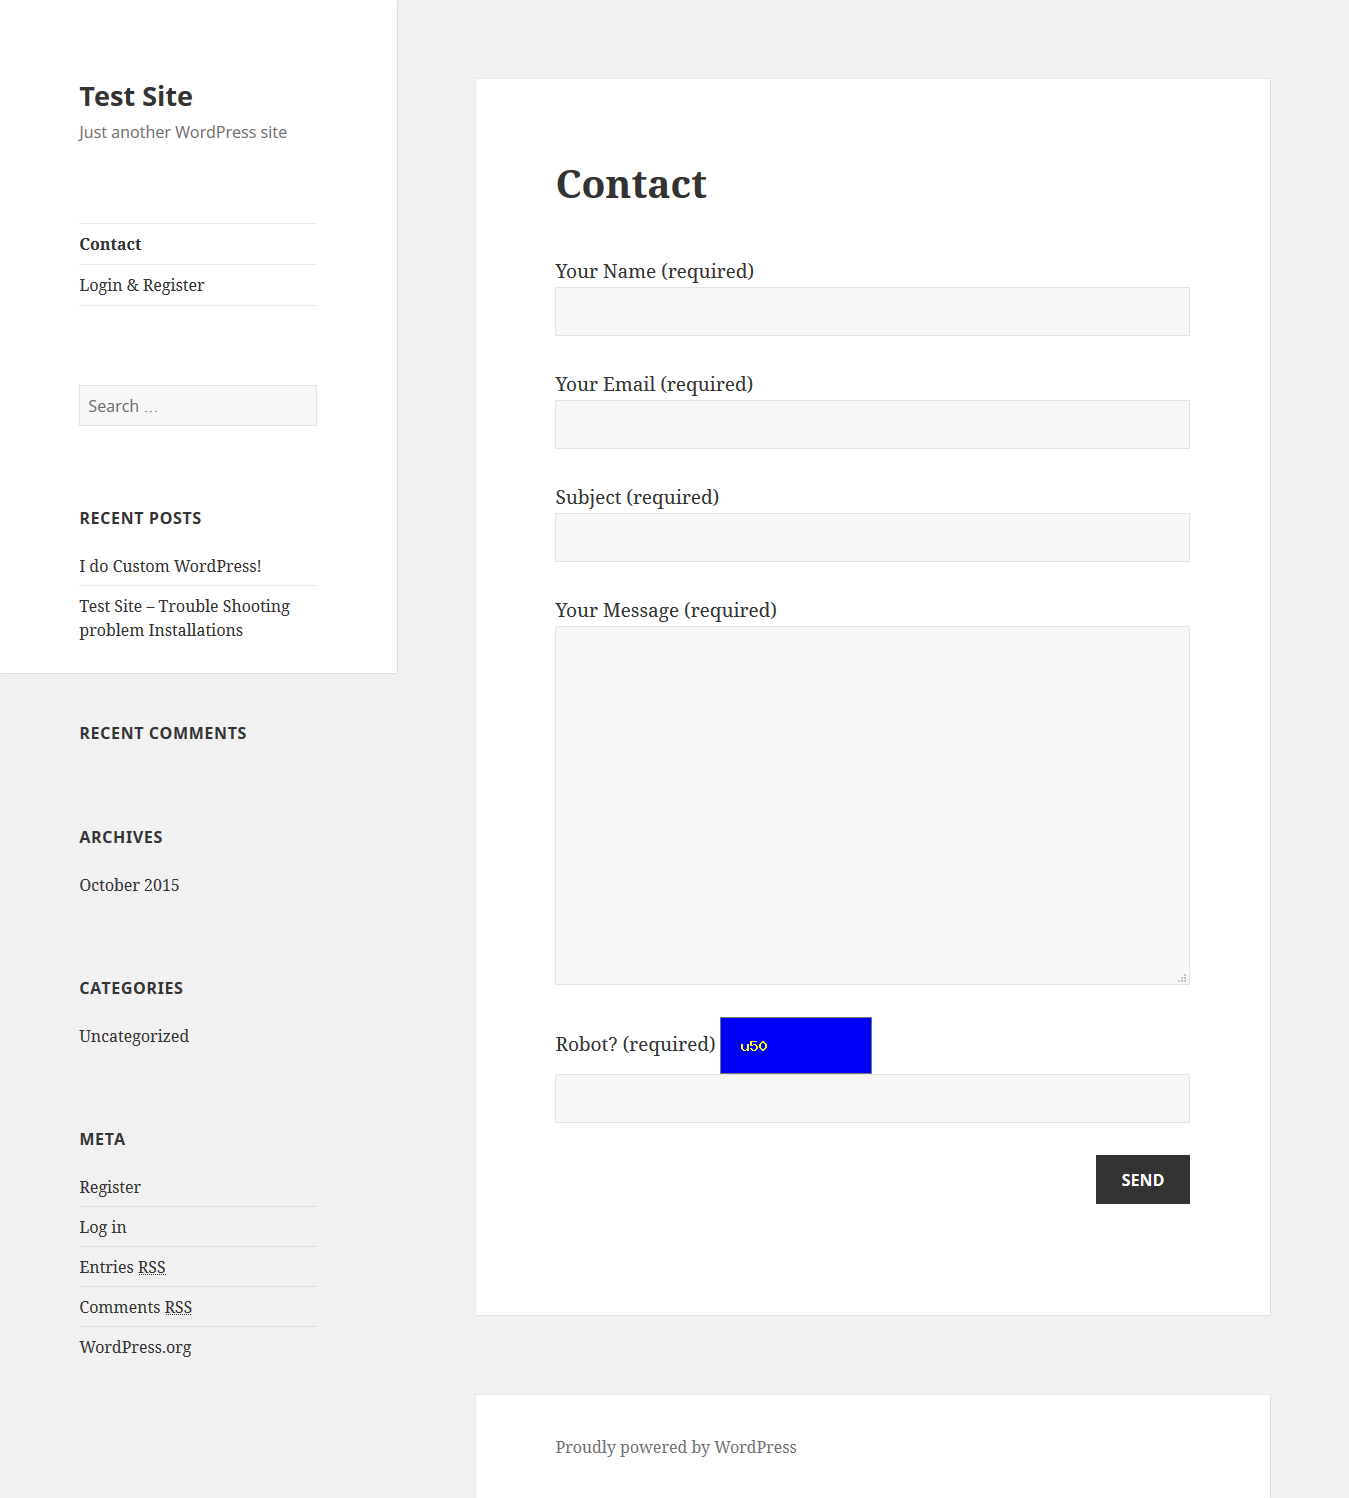 This picture is the what the contact page looks like in a fresh wordpress install with no other plugins. You can add an infinite number of recipients to the wp_mail function.